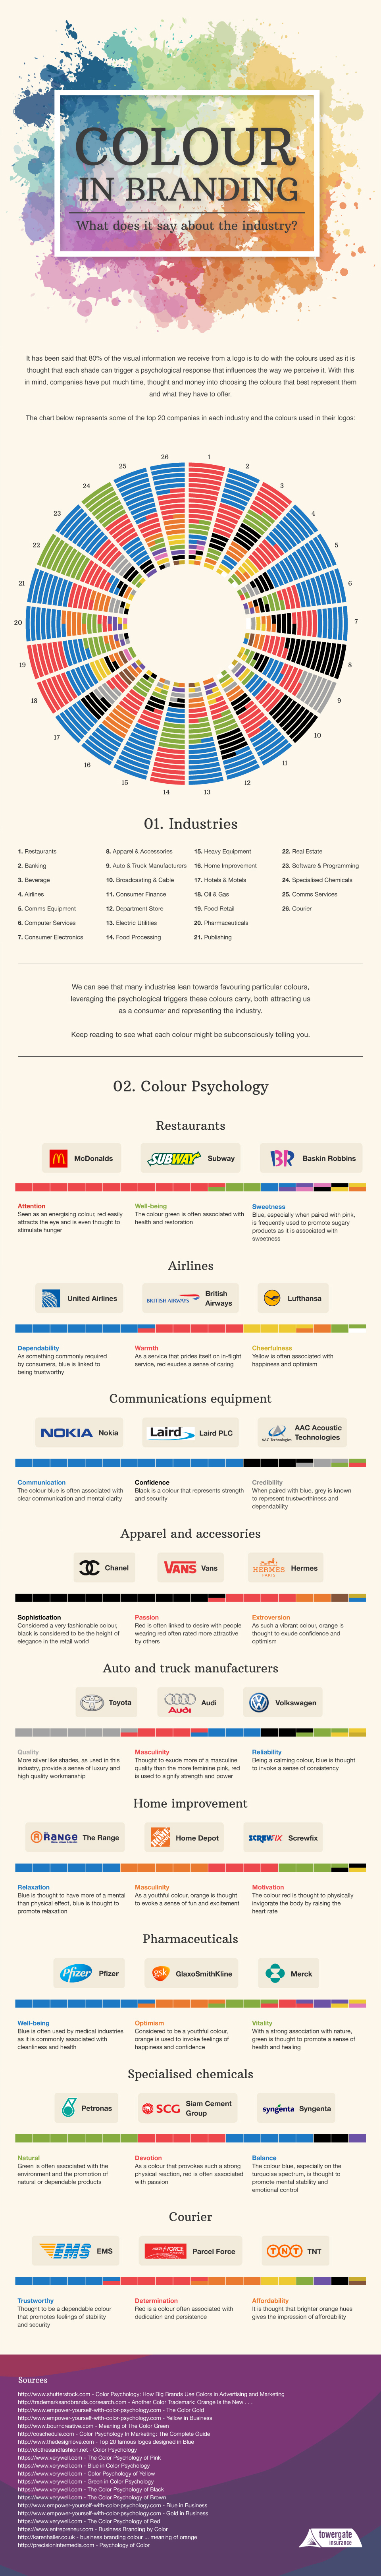 The Most Used Brand Colours In Each Industry And Their Impact On Consumers